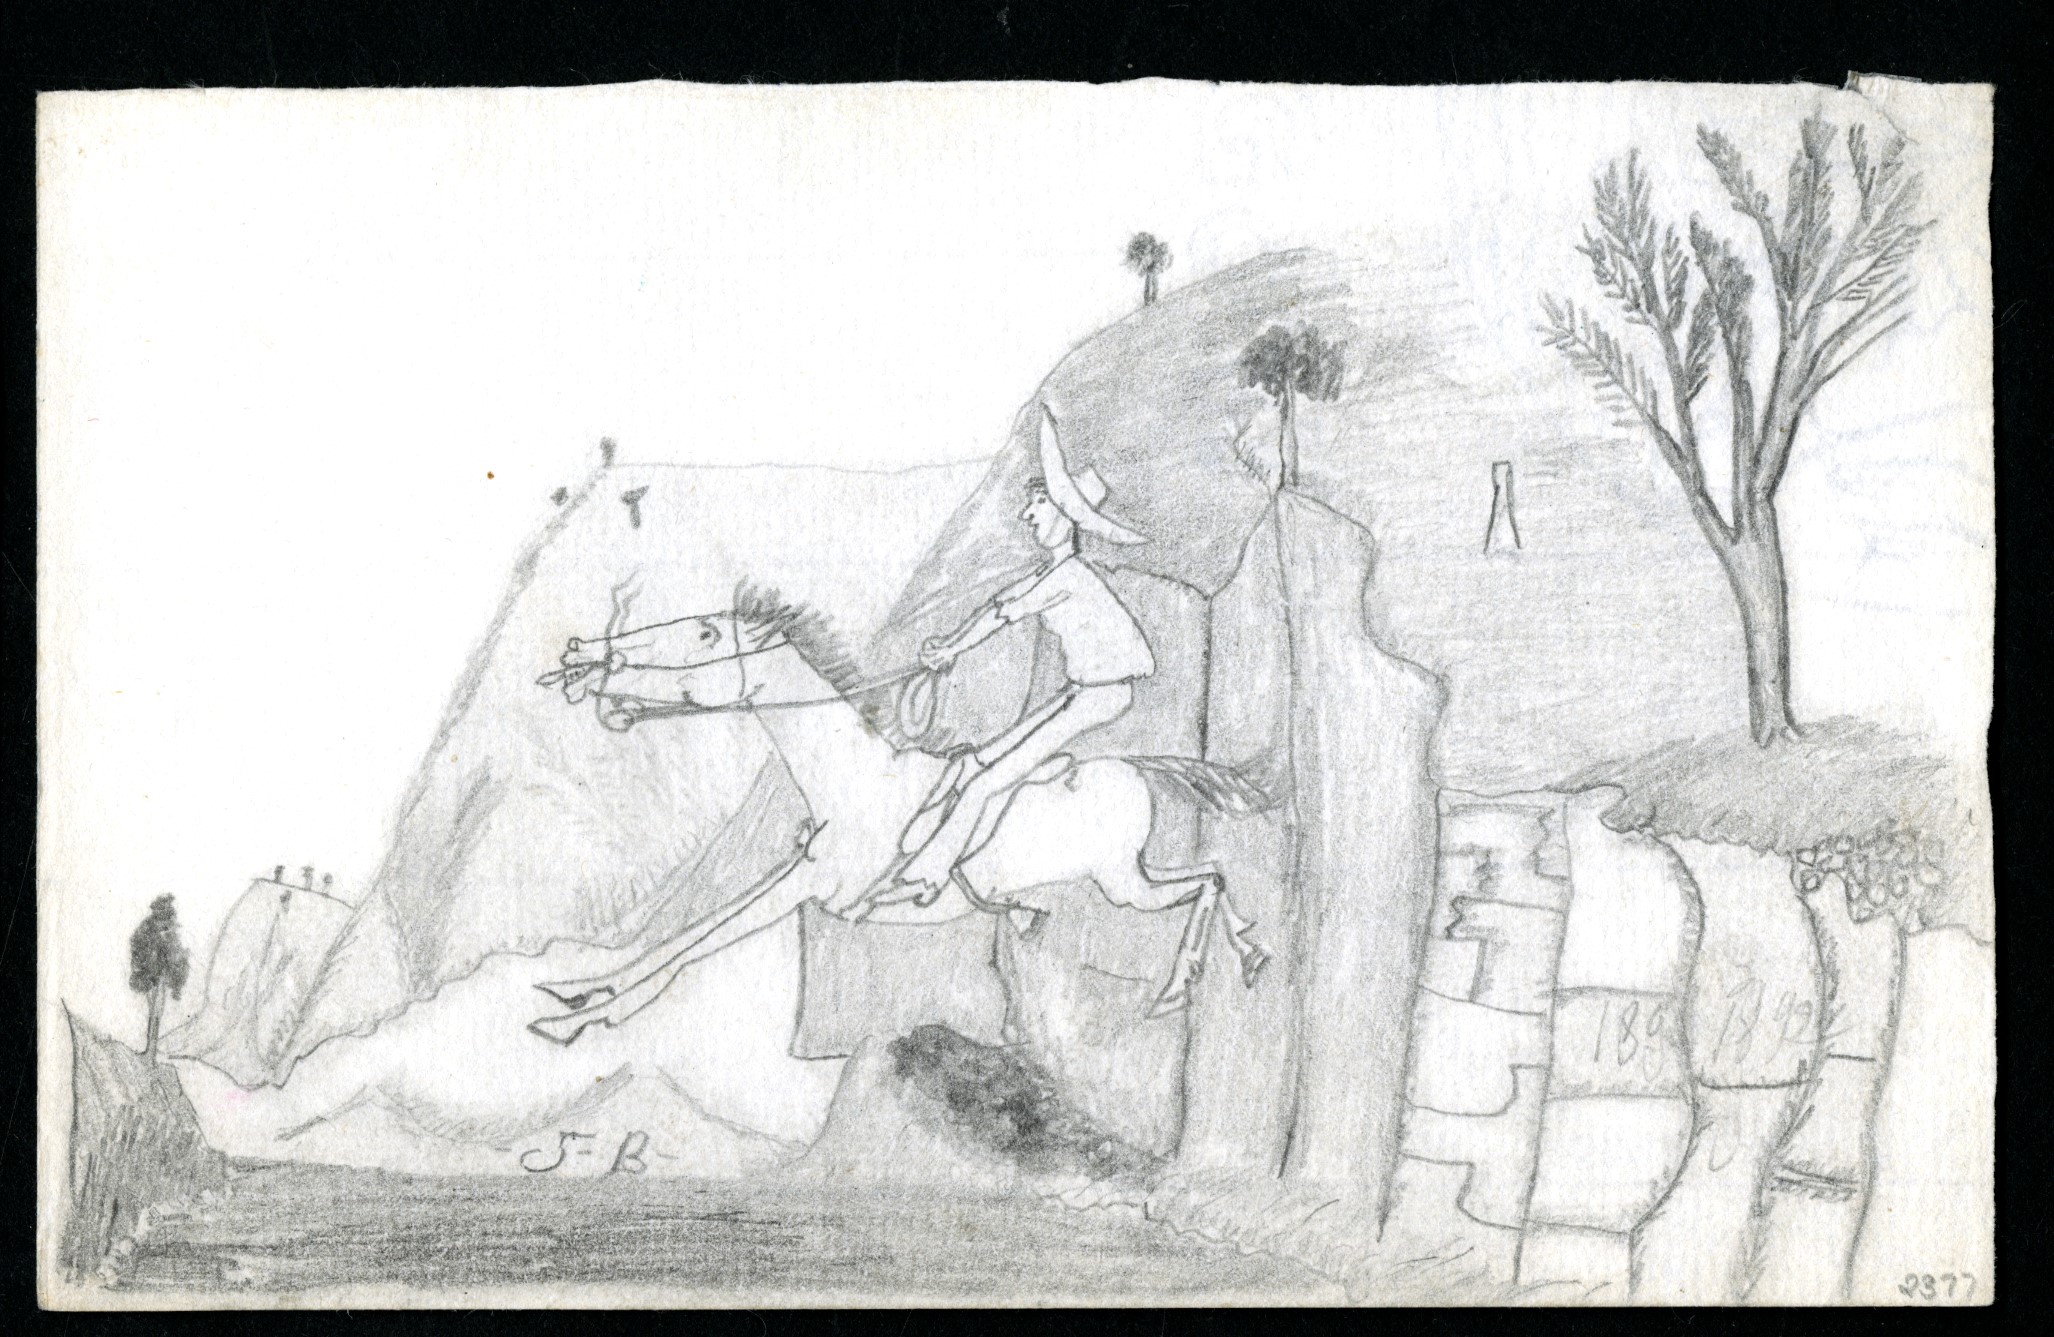 Drawing made by Charlie Flannigan. Illustrations of a man on horseback, hillside, trees and shrub